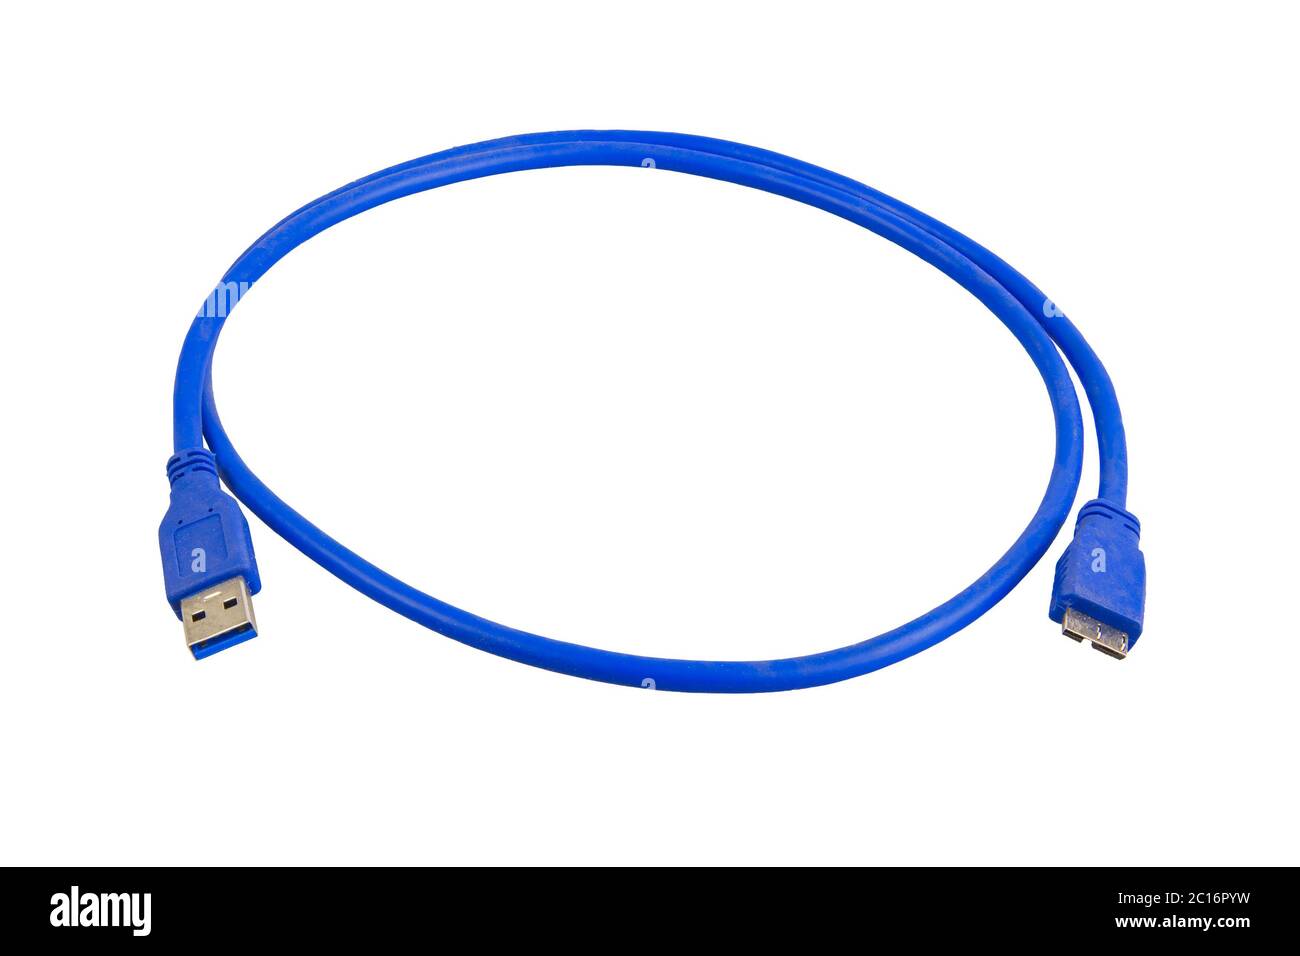 Blue cable usb 3 to micro usb 3 on a white background Stock Photo